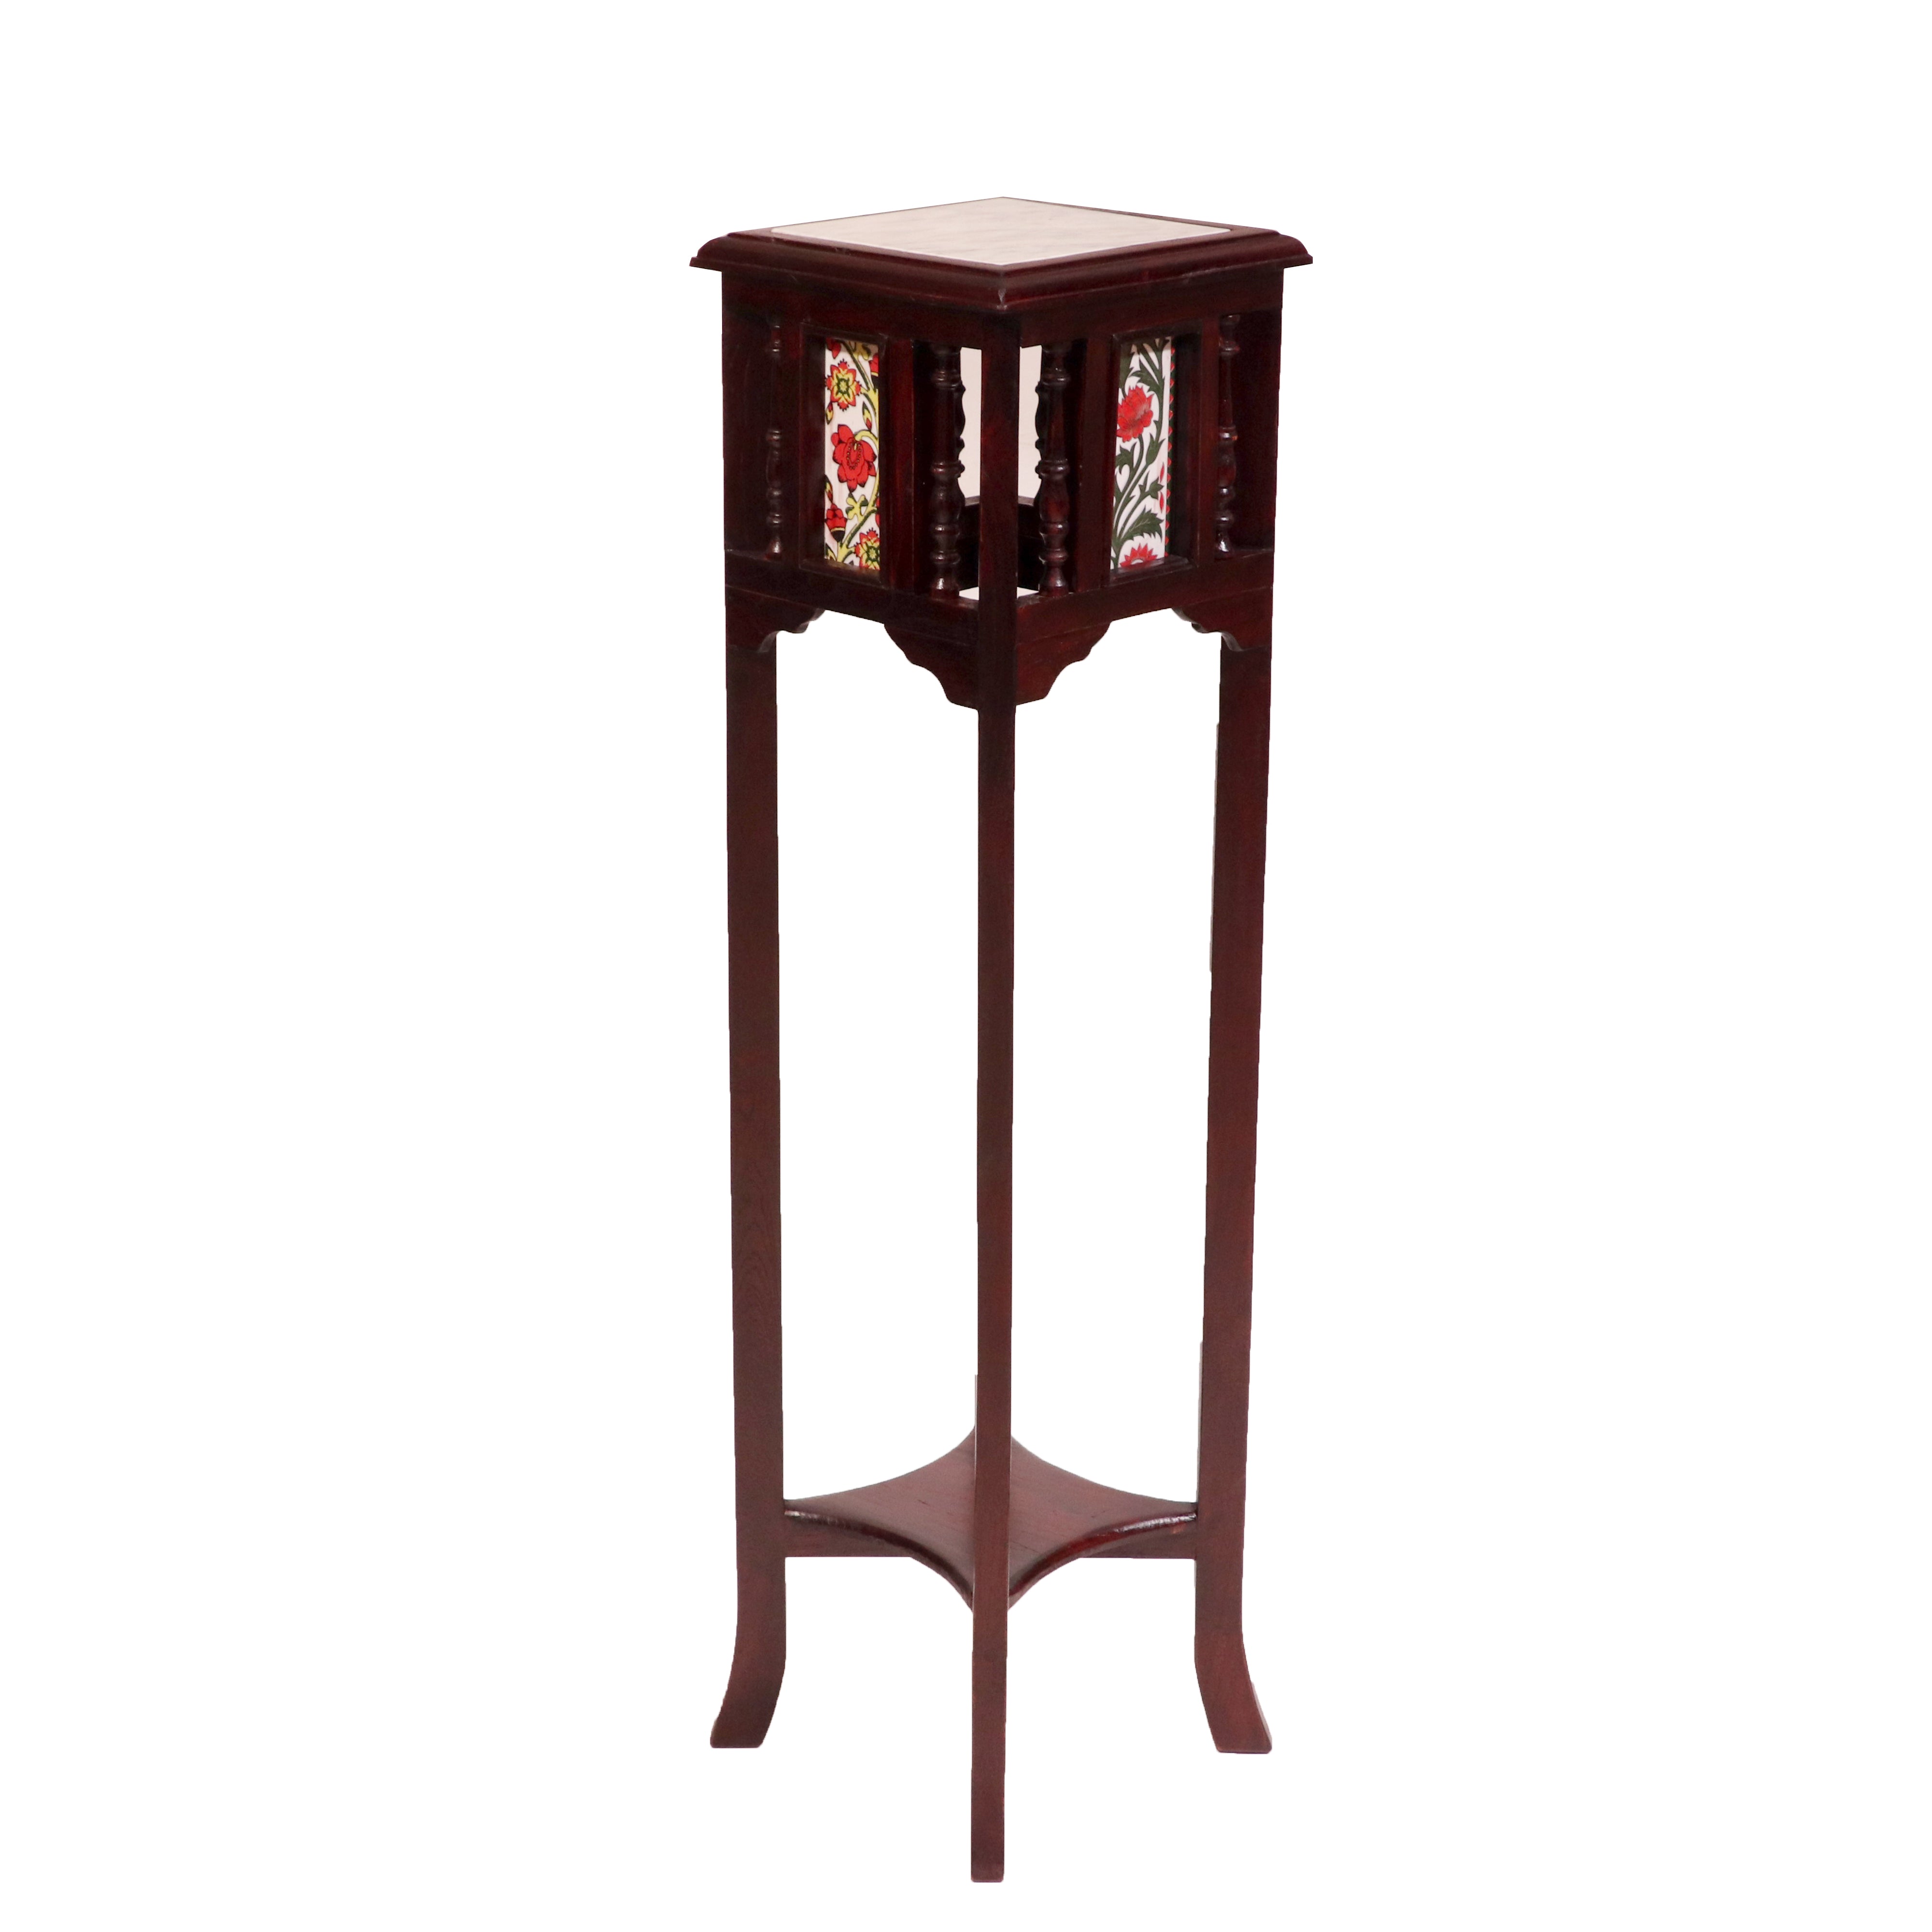 Teak ceramic tile end table with marble top 11 x 11 x 42 Inch End Table